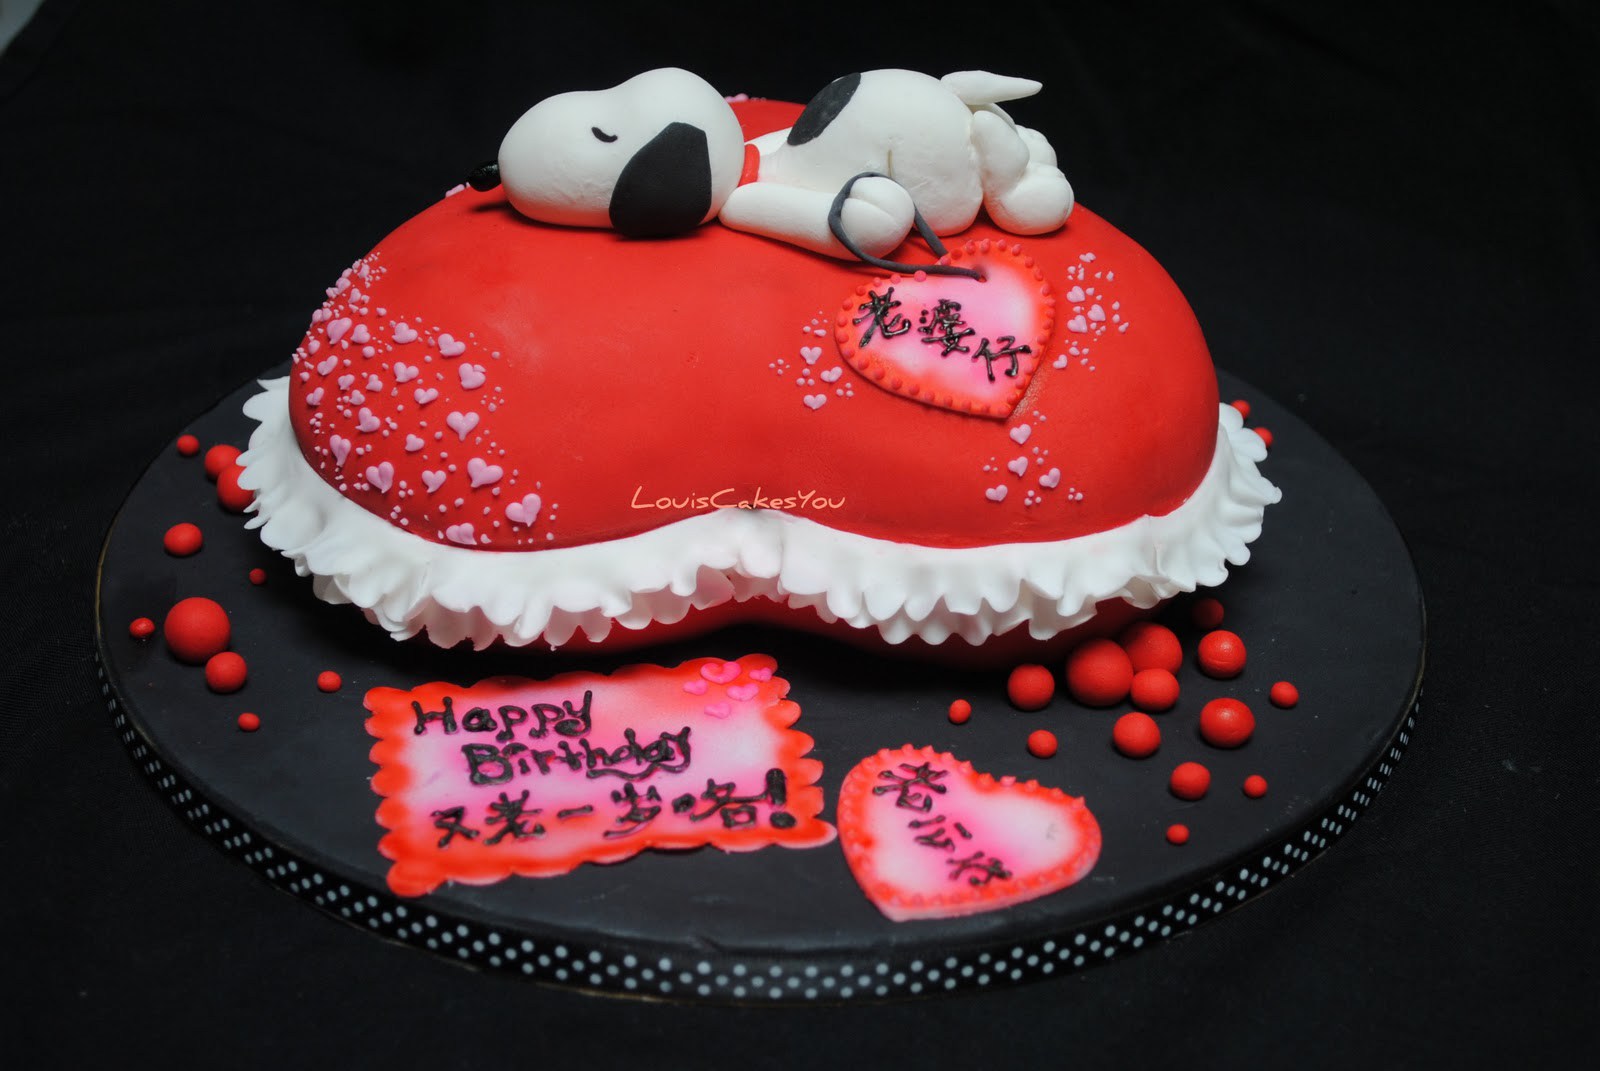 Birthday Cakes Images For Girlfriend, Bday Wishes Cakes. bdaywishescakes.co...